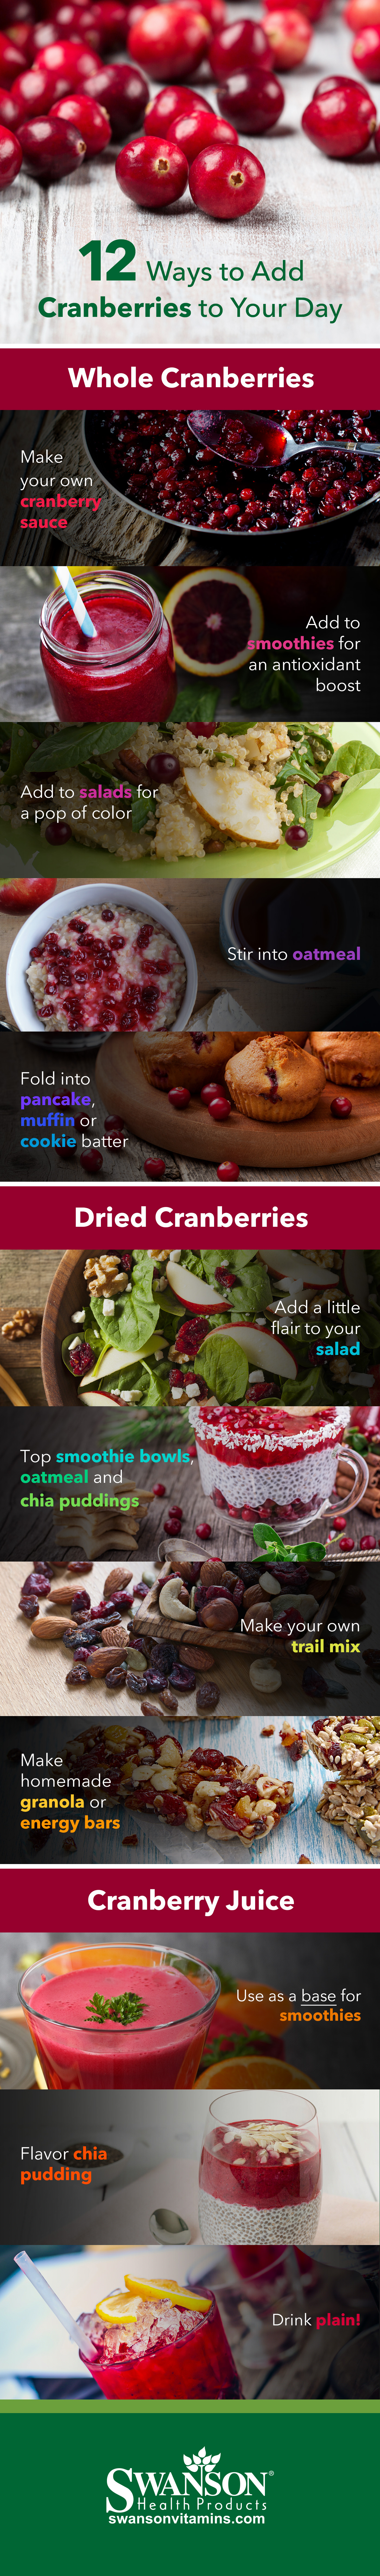 Benefits of Cranberries (Plus 12 Ways to Use Them!)